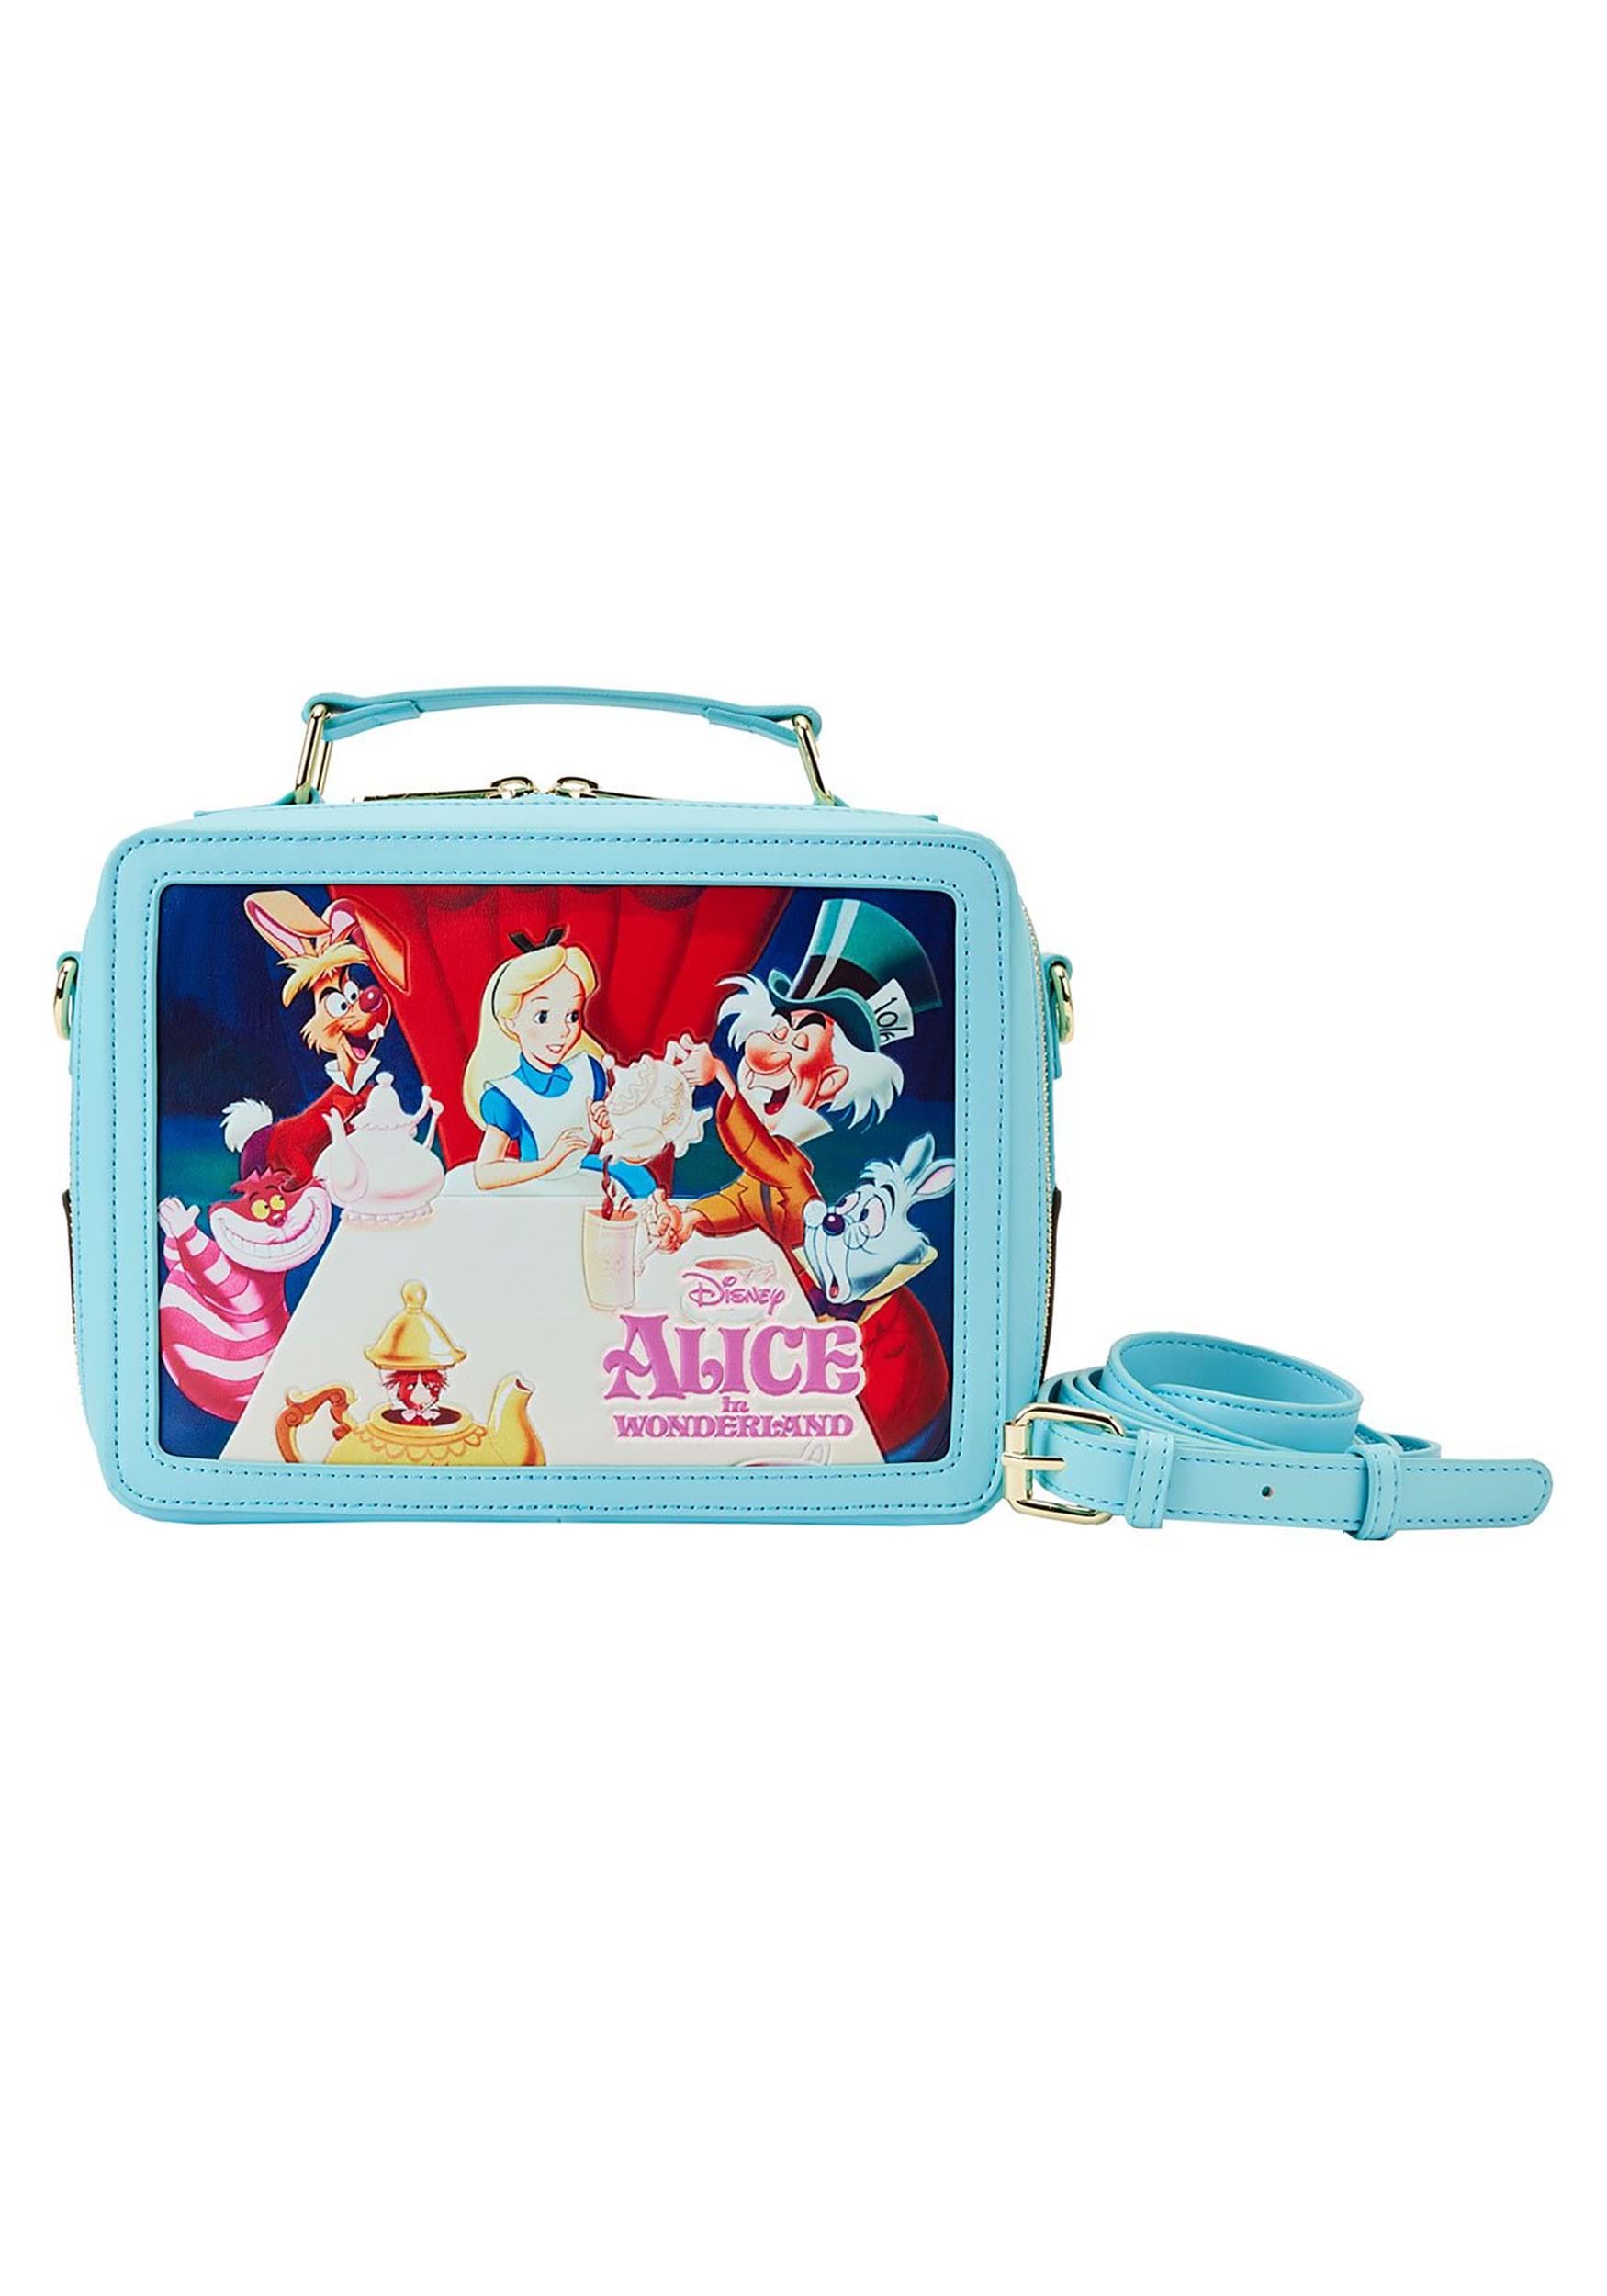 https://images.fun.com/products/91364/2-1-272359/loungefly-disney-alice-in-wonderland-lunch-box-bag-alt-1.jpg